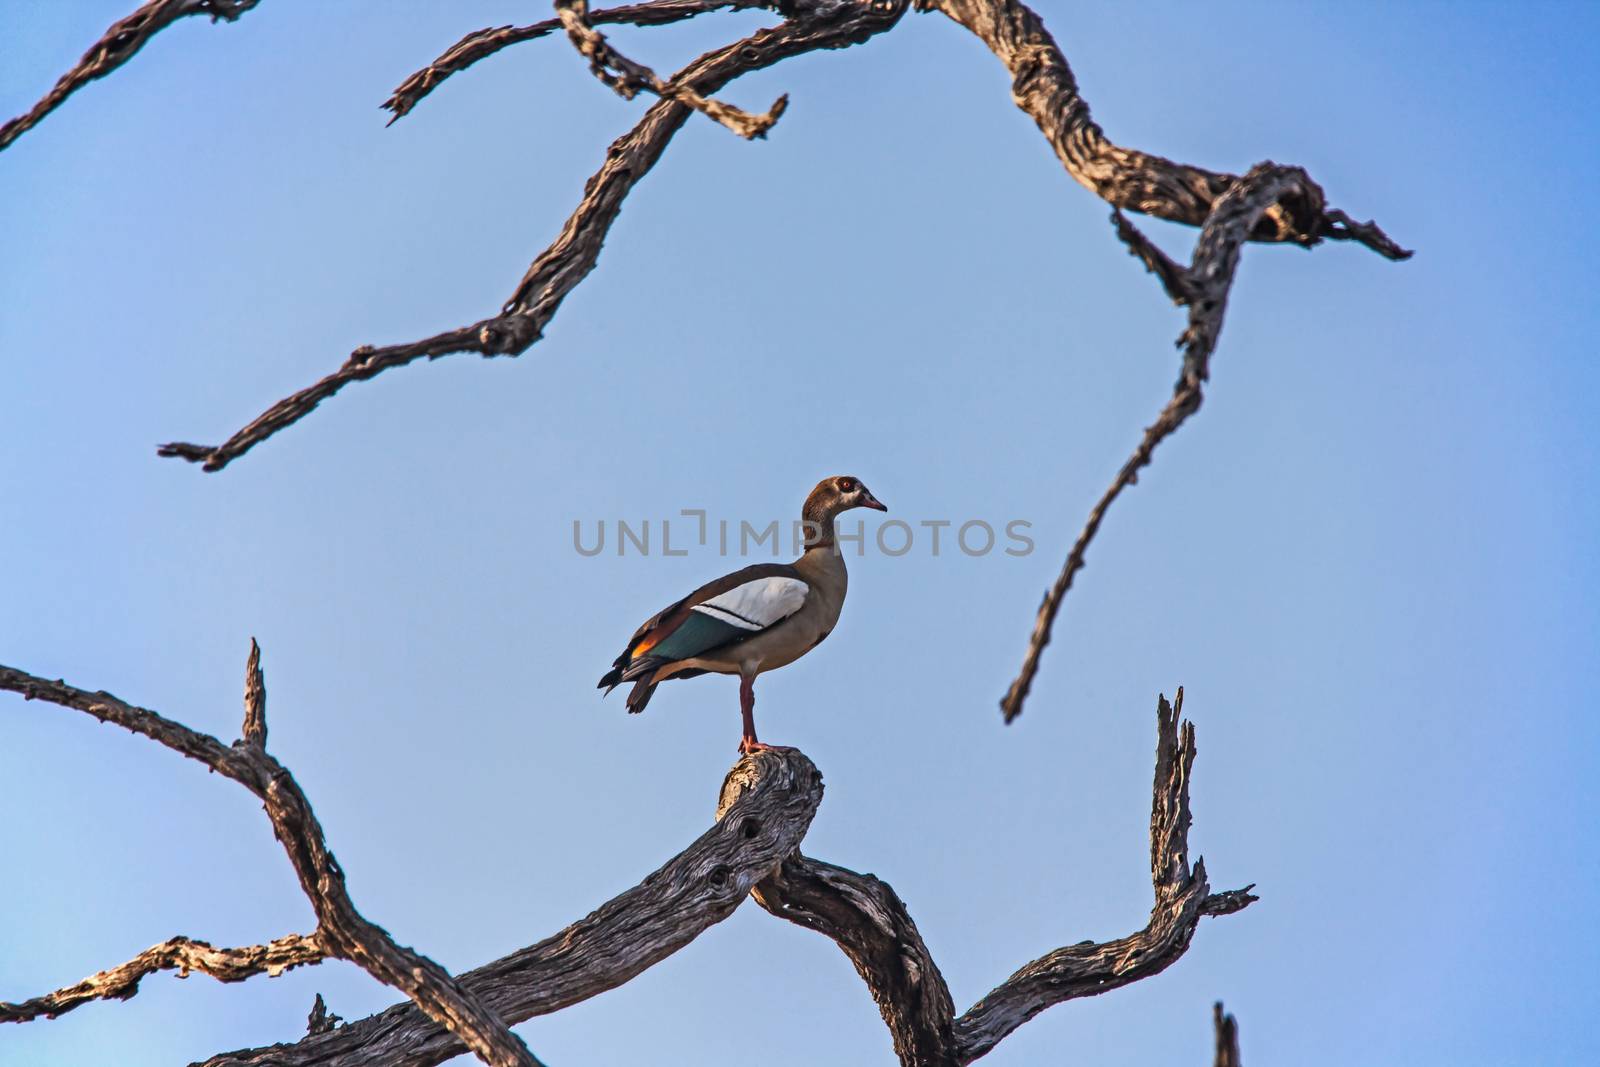 Lone Egyptian Goose on a branch by kobus_peche